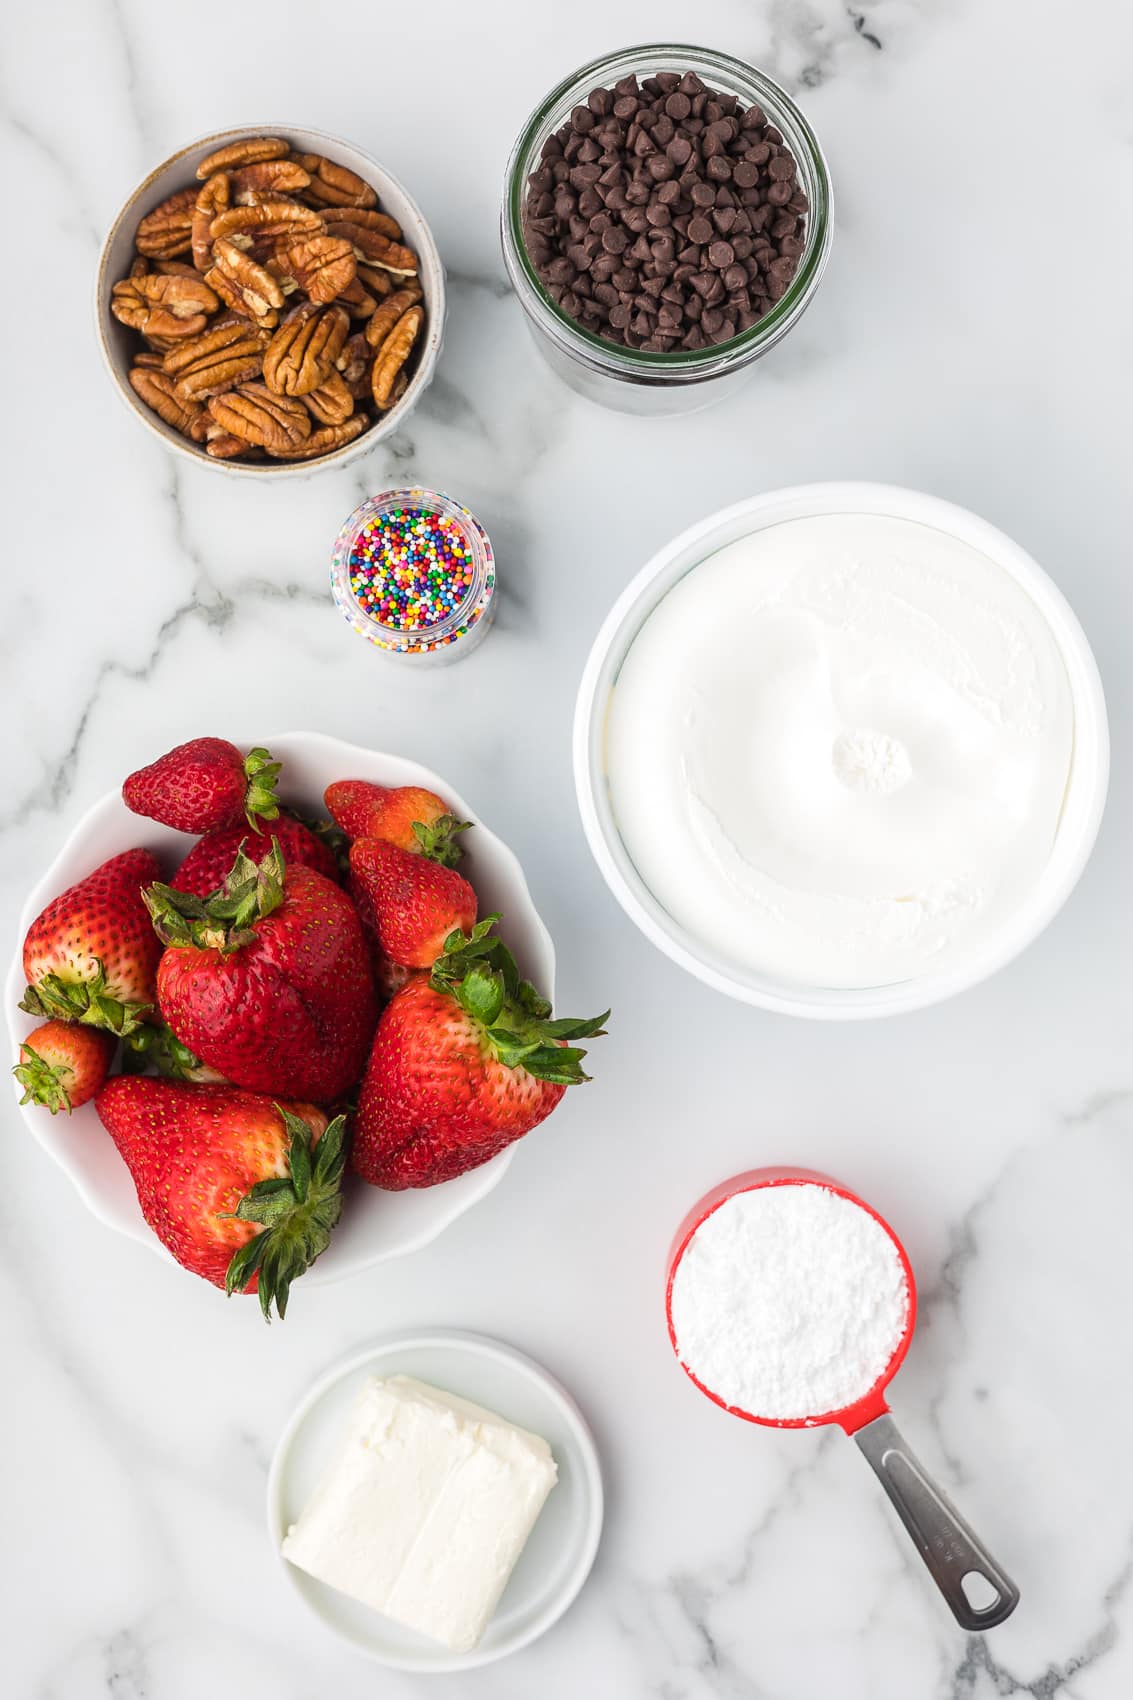 Ingredients to make deviled strawberries including strawberries, toppings, cream cheese, prepared whip topping and powdered sugar.